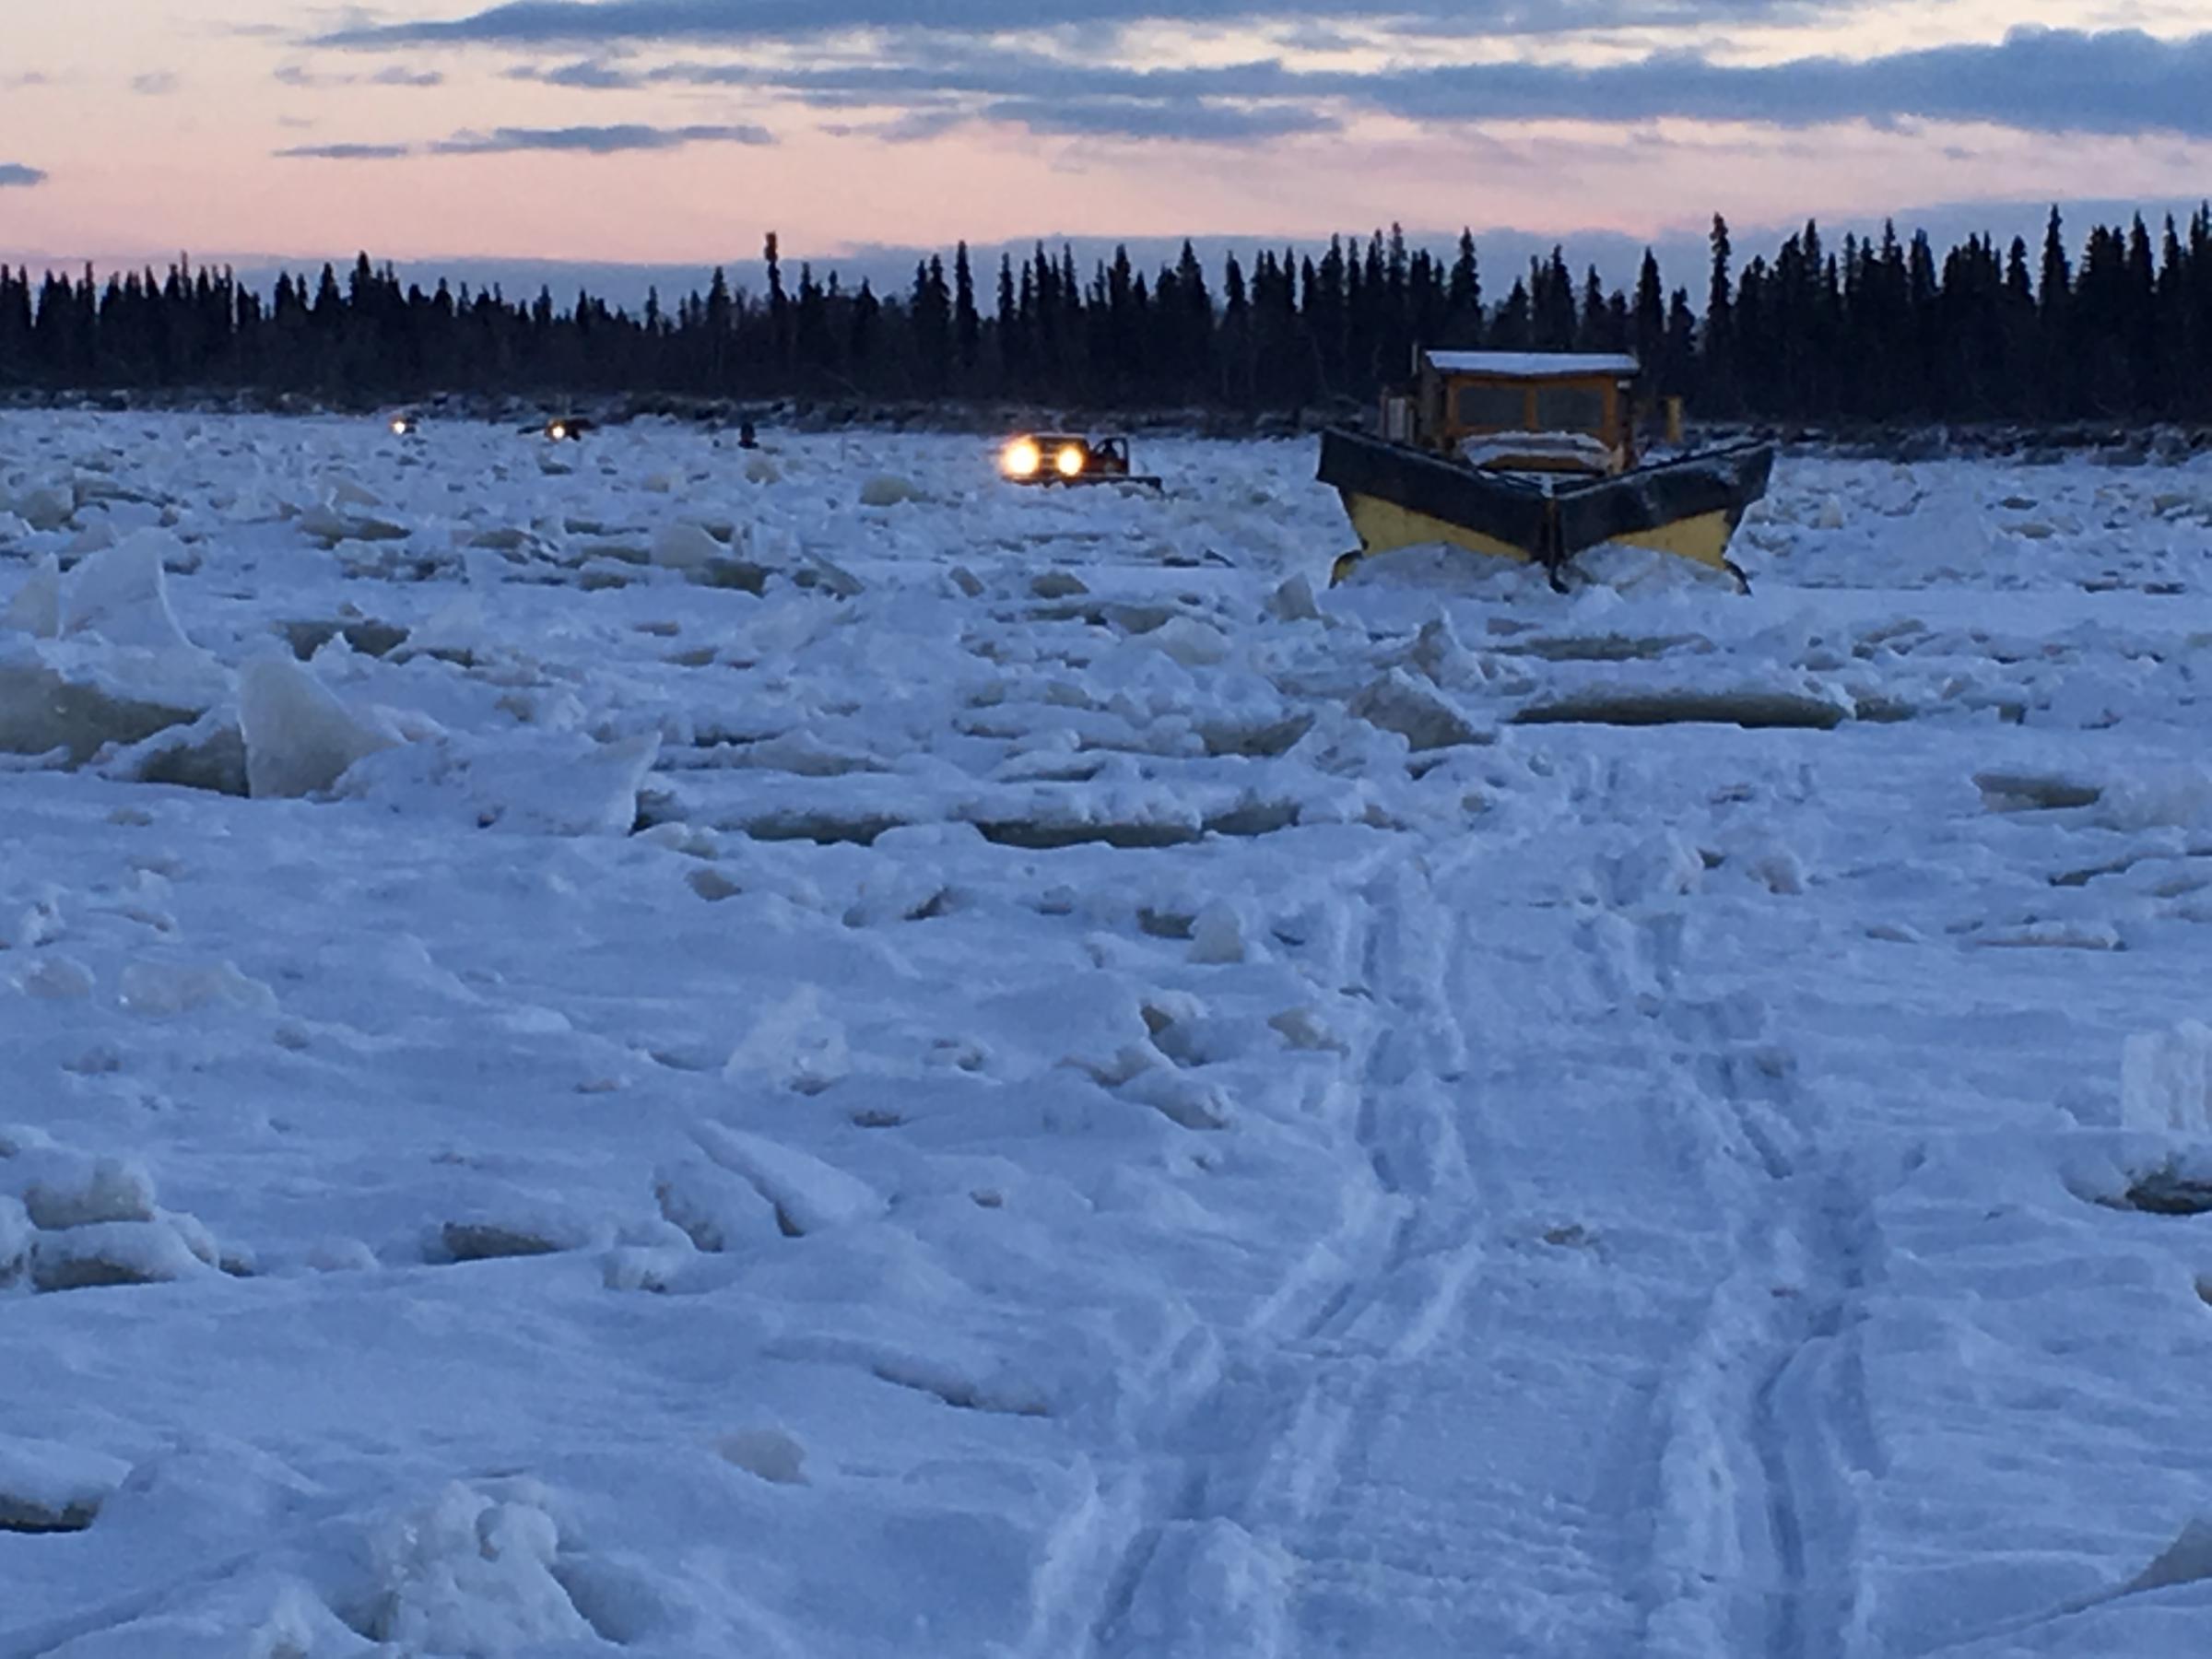 Mad Max, the 52-year-old plow truck, scrapes a 25-mile trail from Kalskag to just above Tuluksak. (Photo by Mark Leary)